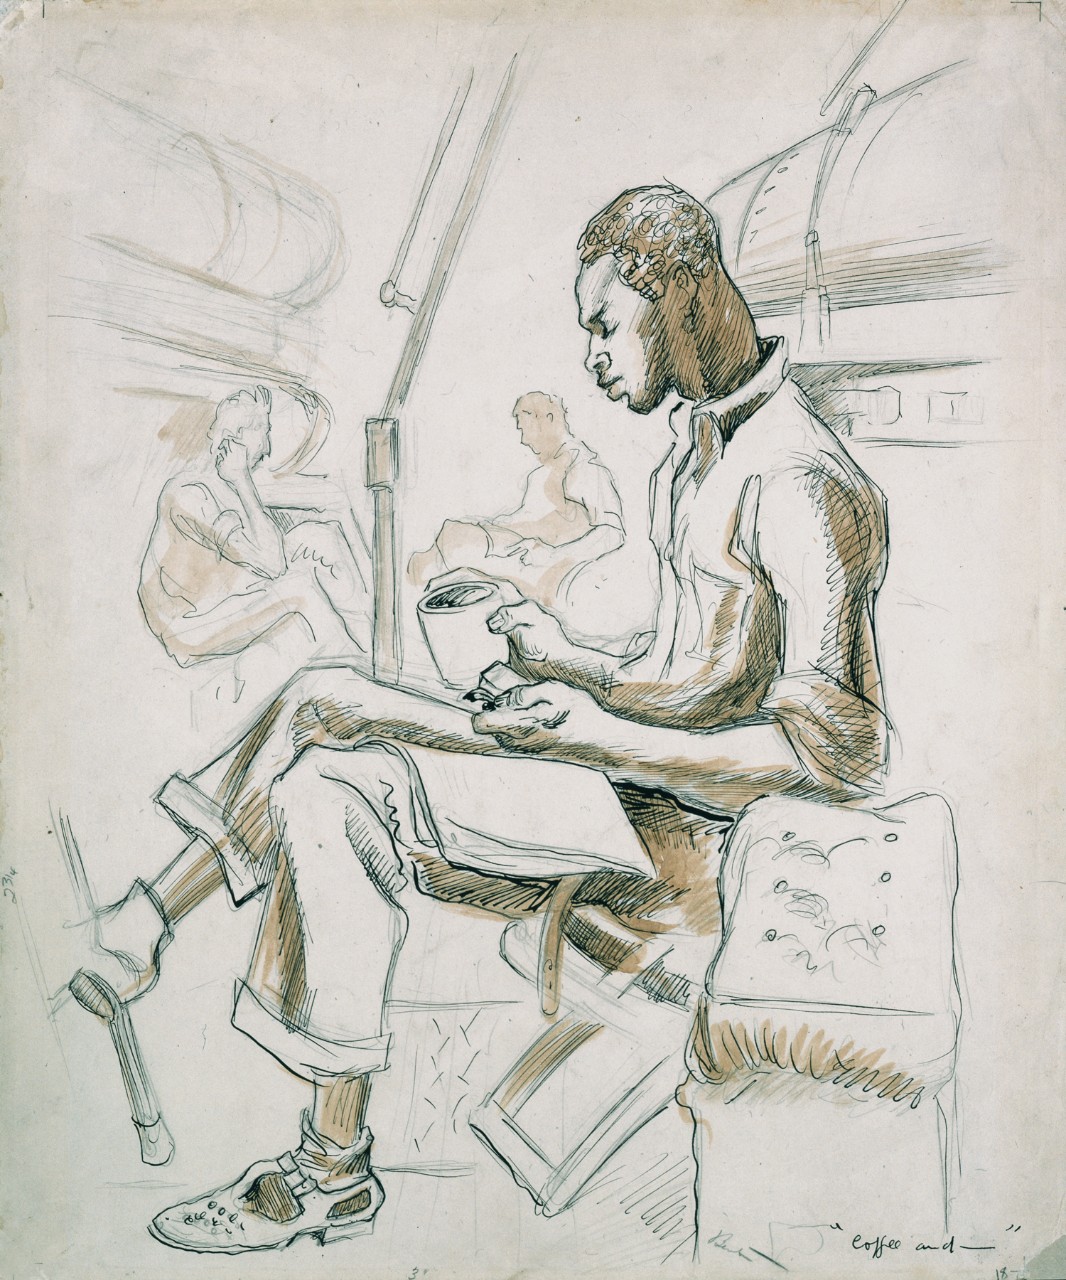 A sailor is reading and drinking a cup of coffee